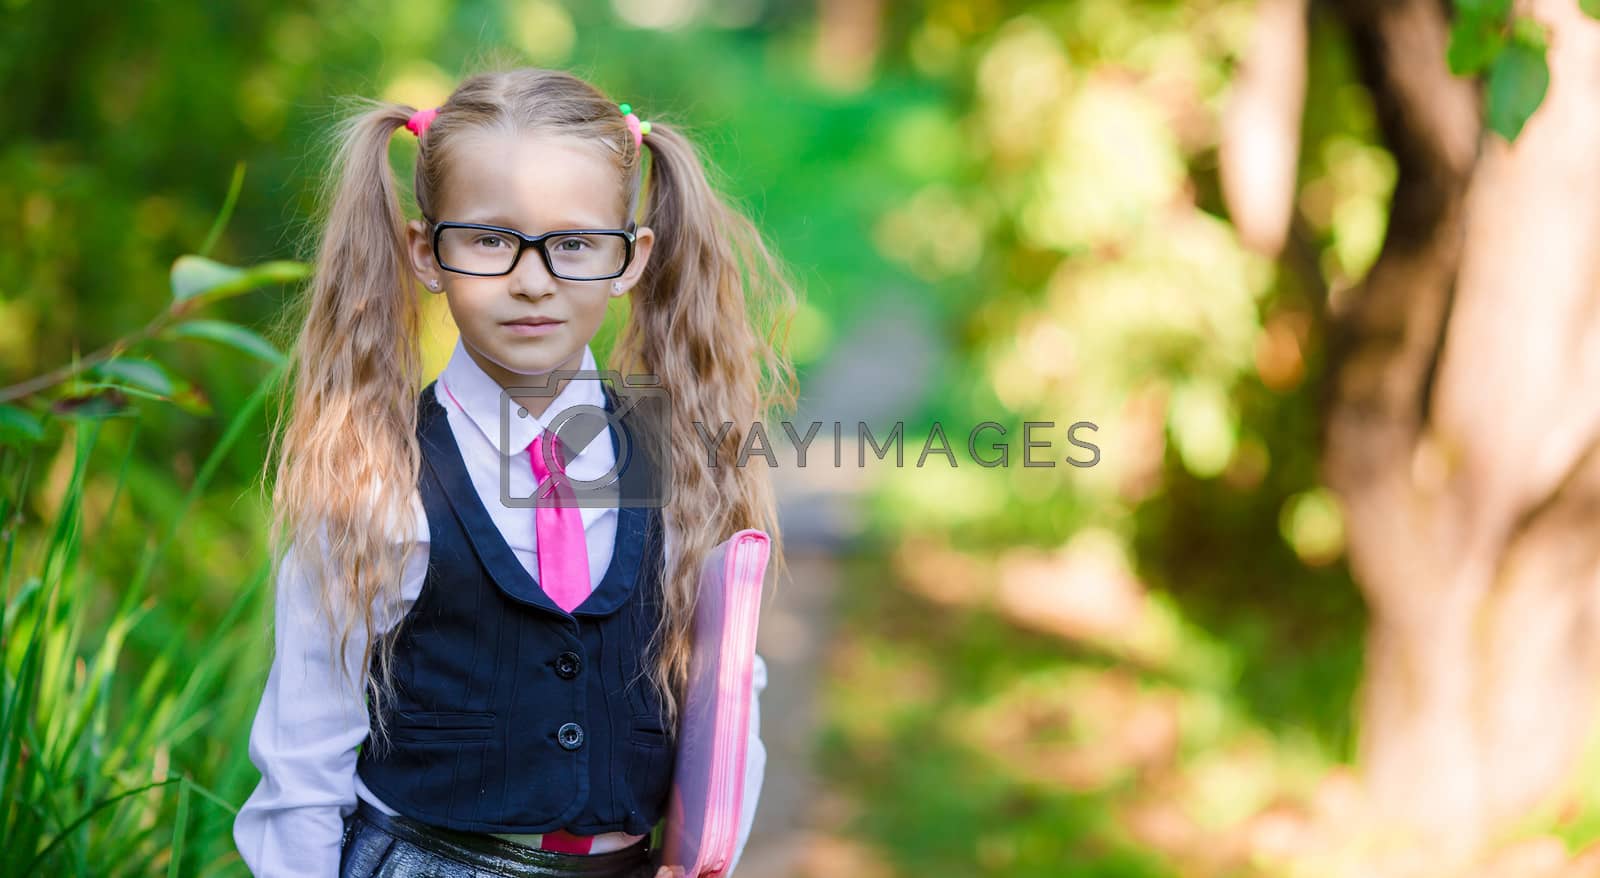 Royalty free image of Portrait of adorable little school girl with notes in glasses outdoor going to school by travnikovstudio